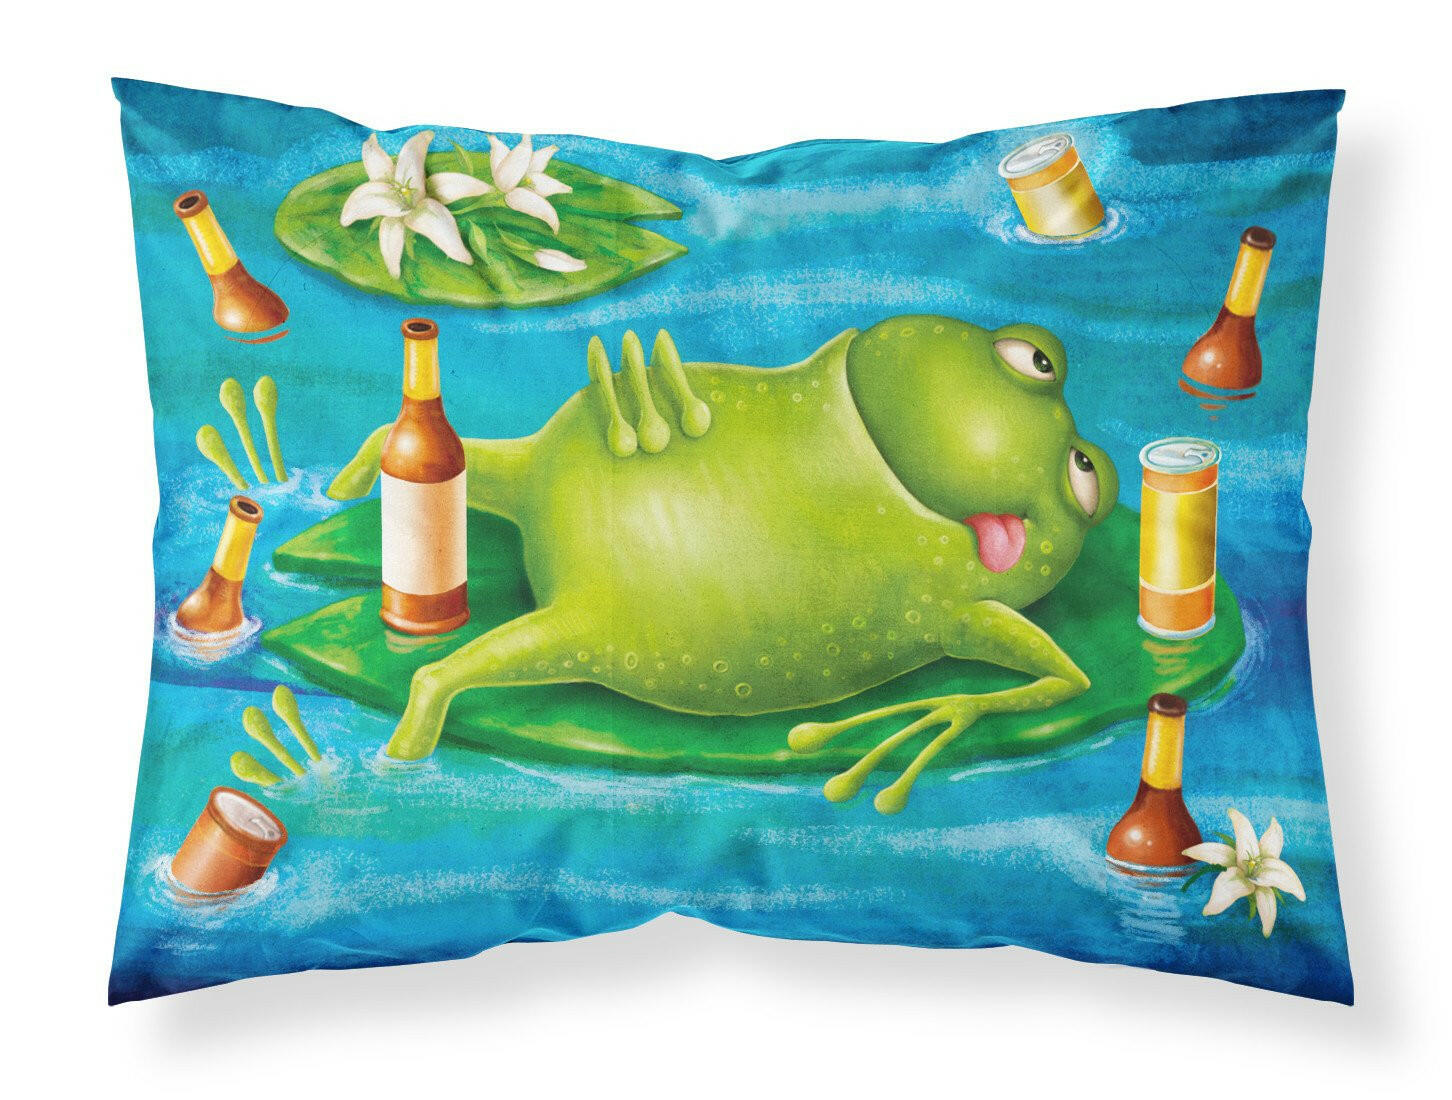 Frog Drinking Beer Fabric Standard Pillowcase APH0093PILLOWCASE by Caroline's Treasures